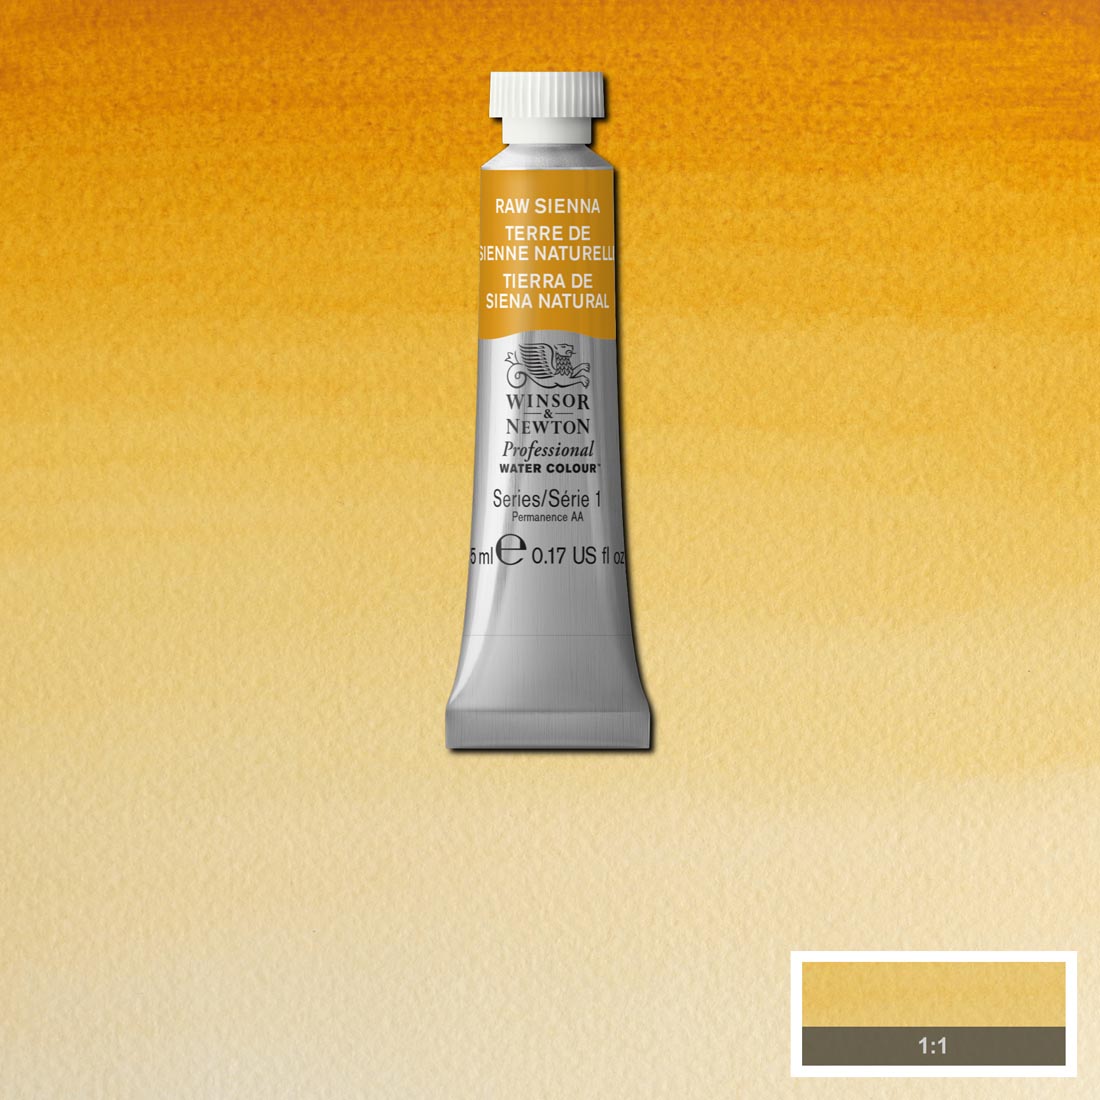 Tube of Raw Sienna Winsor & Newton Professional Water Colour with a paint swatch for the background